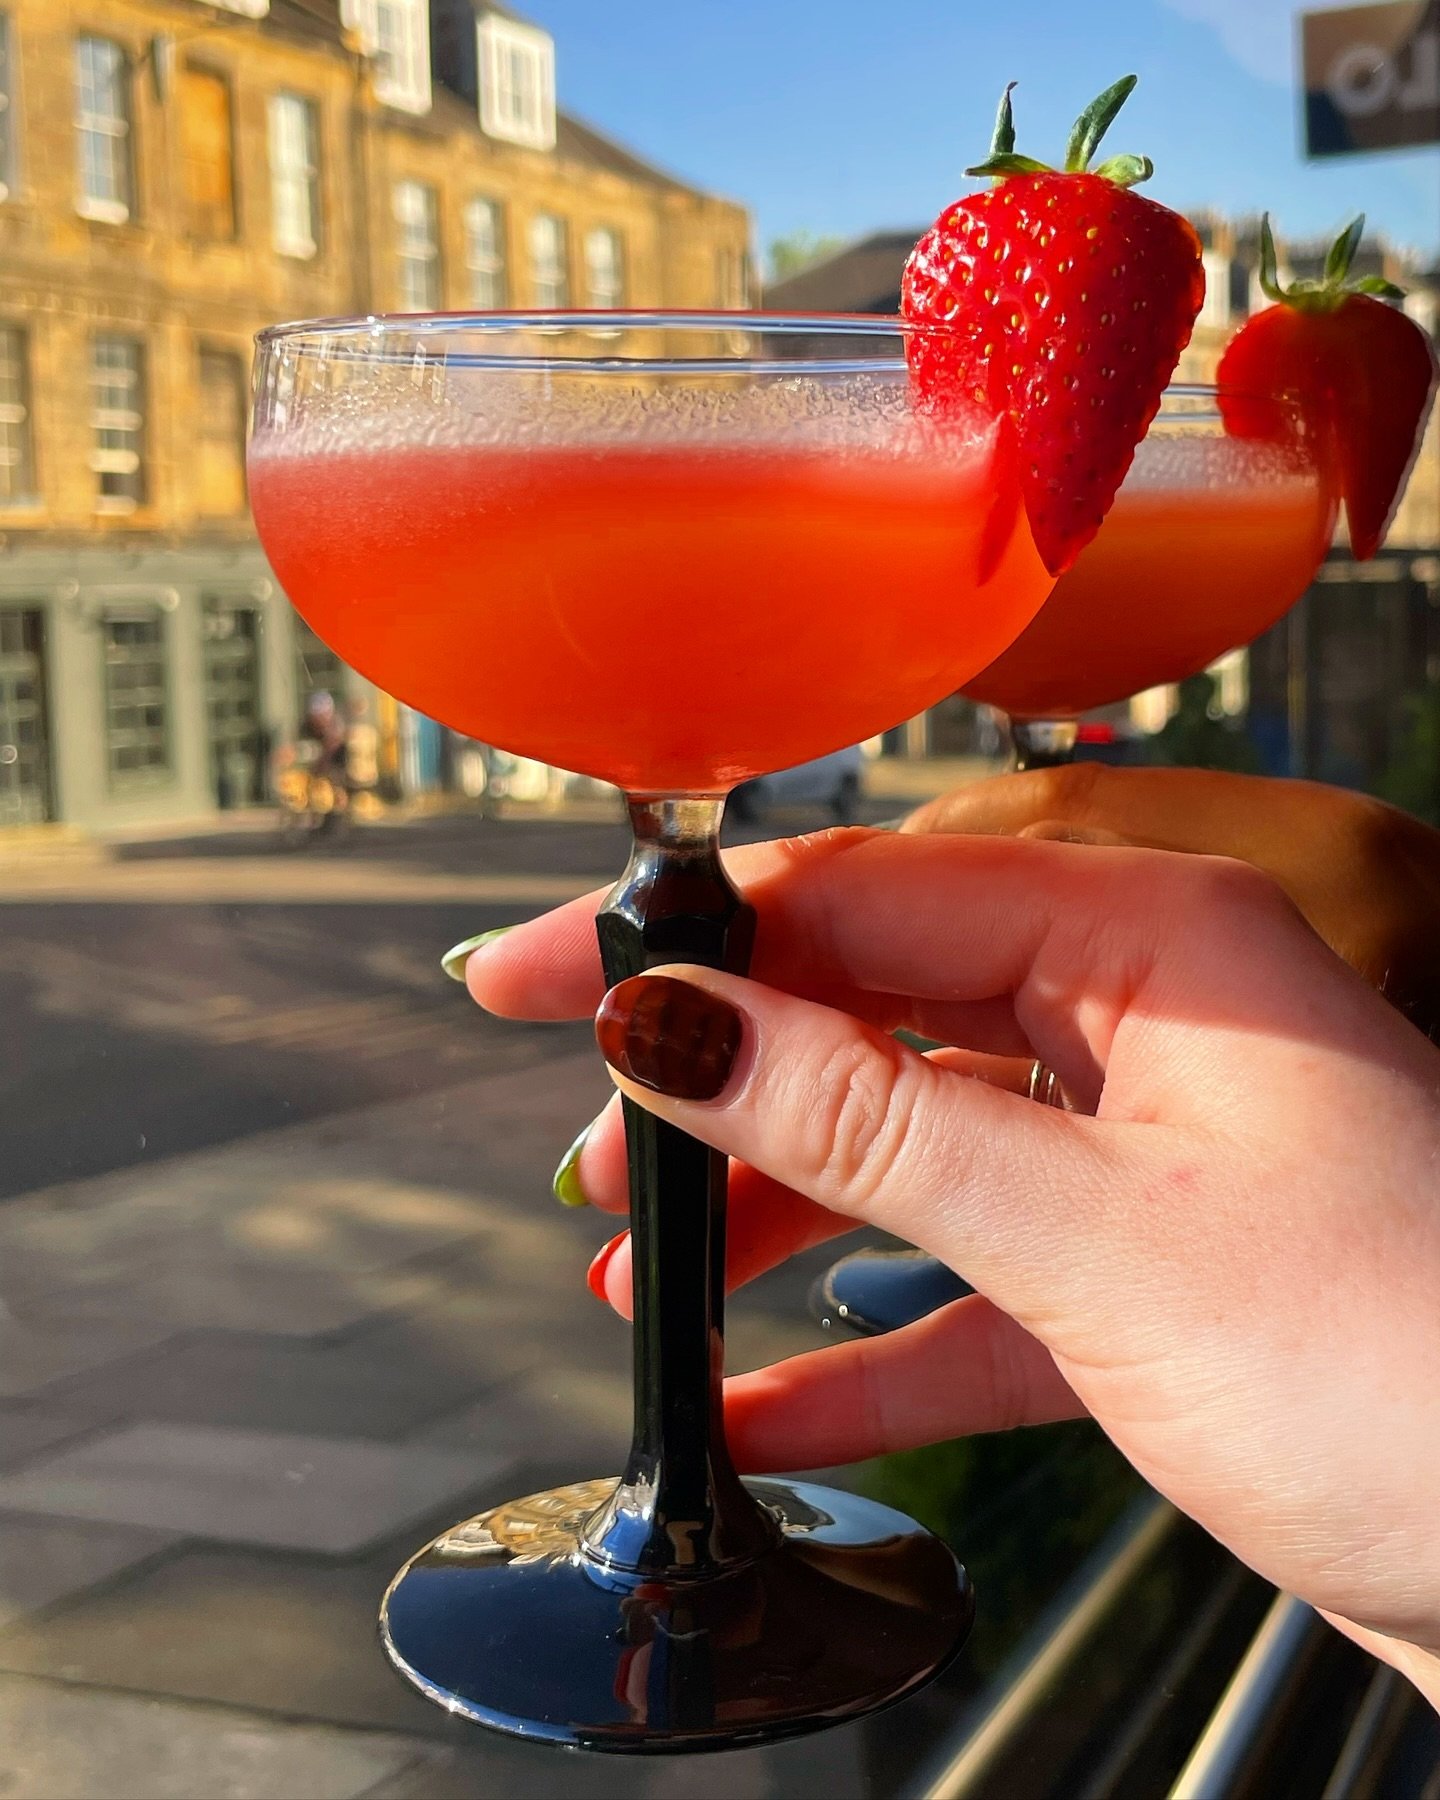 ✨🍓BERRY SUPERSTITIOUS🍓✨

ROLLO&rsquo;s cocktail of the week 💋

Give ROLLO a follow and tag us in your best ROLLO pics to get our cocktail of the week on us! ❤️

&bull;

&bull;

&bull;

#summer #berrysuperstitious #cocktail #restaurant #edinburghun